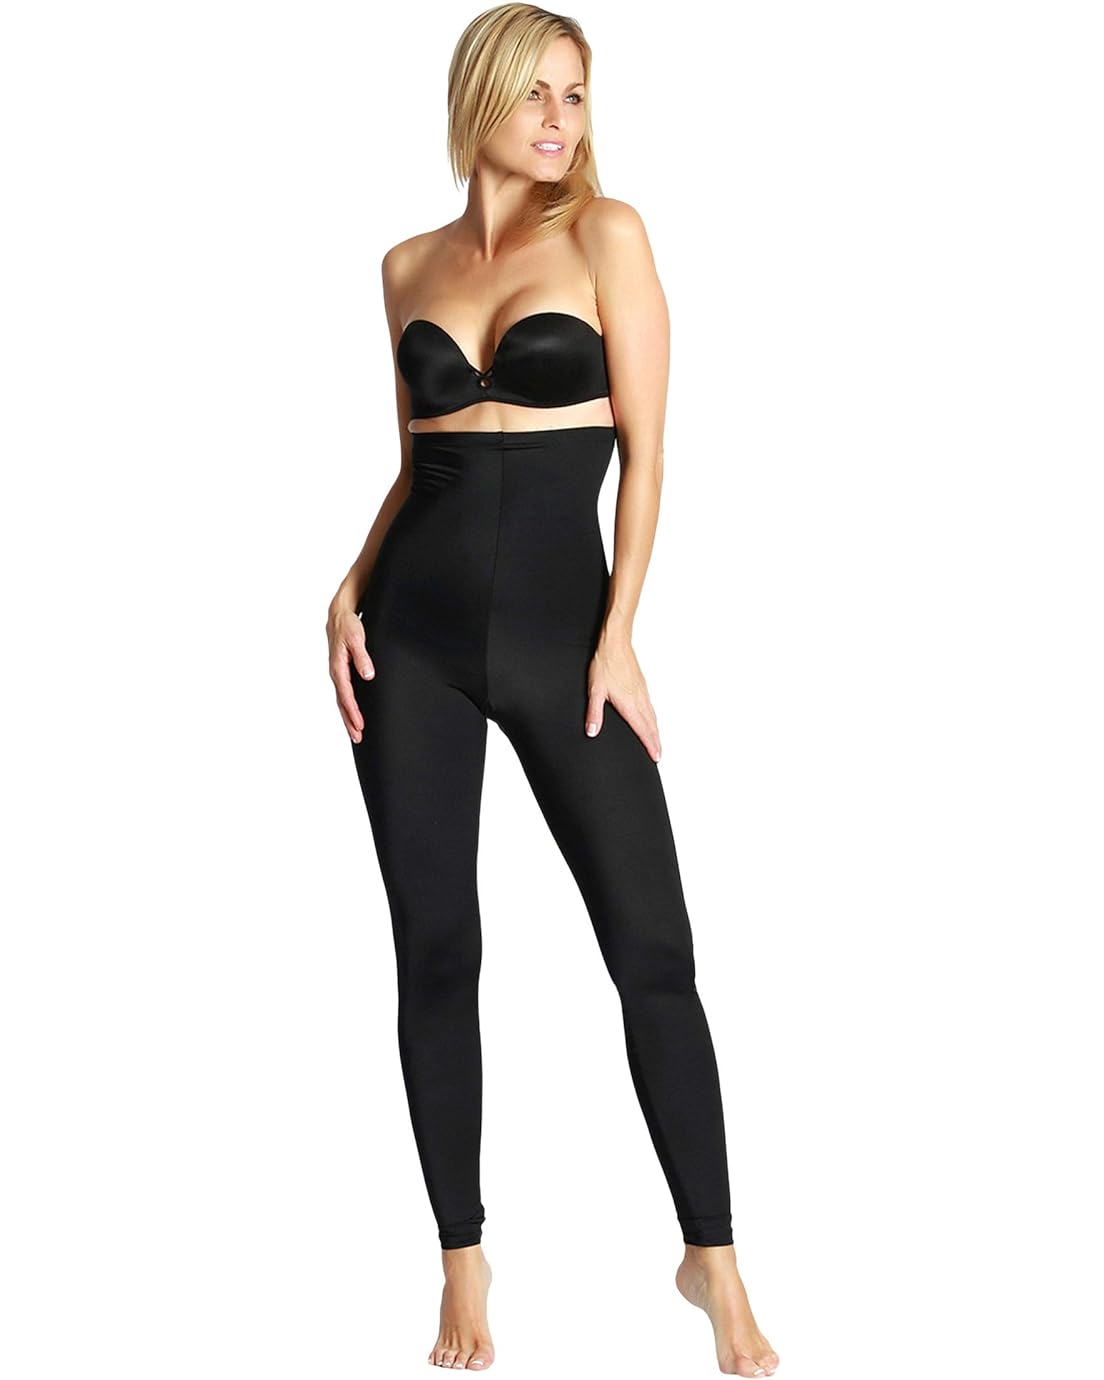 InstantRecoveryMD High-Waisted Compression Leggings